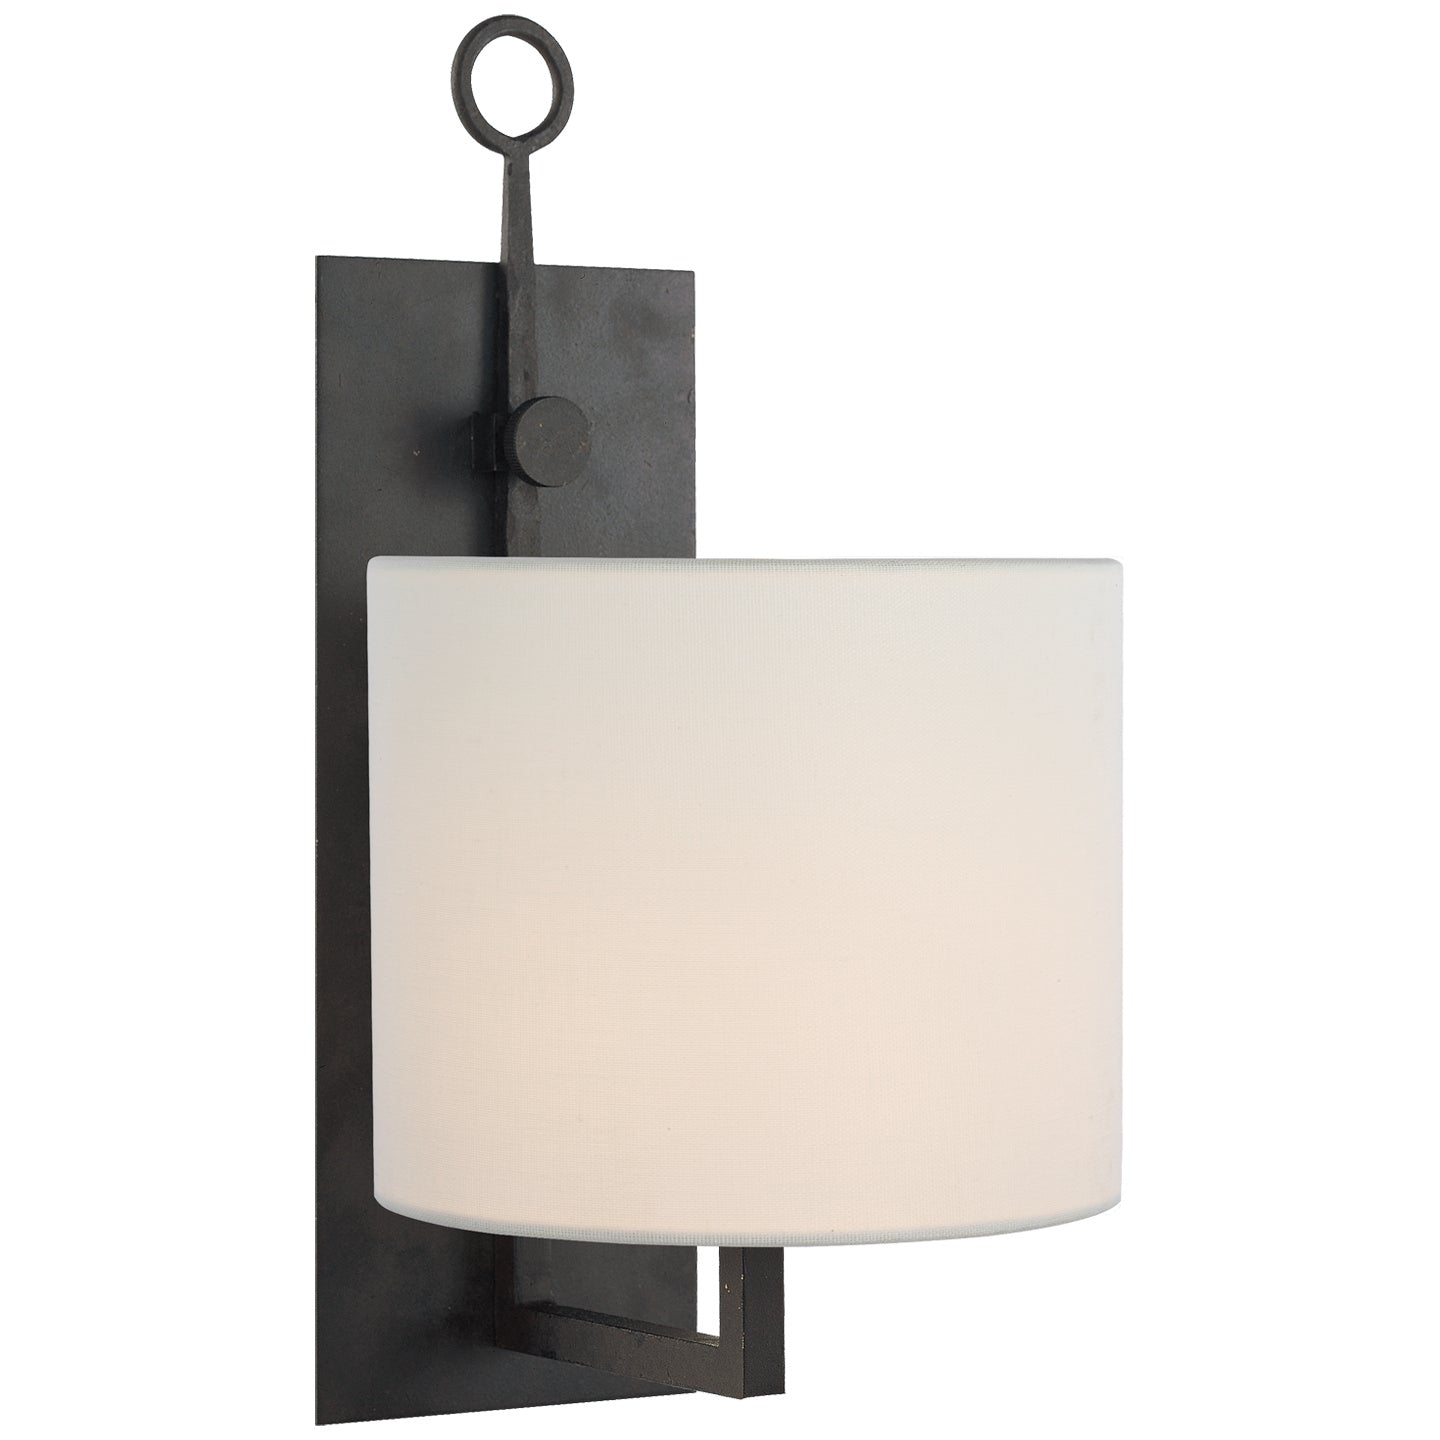 Load image into Gallery viewer, Visual Comfort Signature - S 2030BR-L - One Light Wall Sconce - Aspen - Blackened Rust
